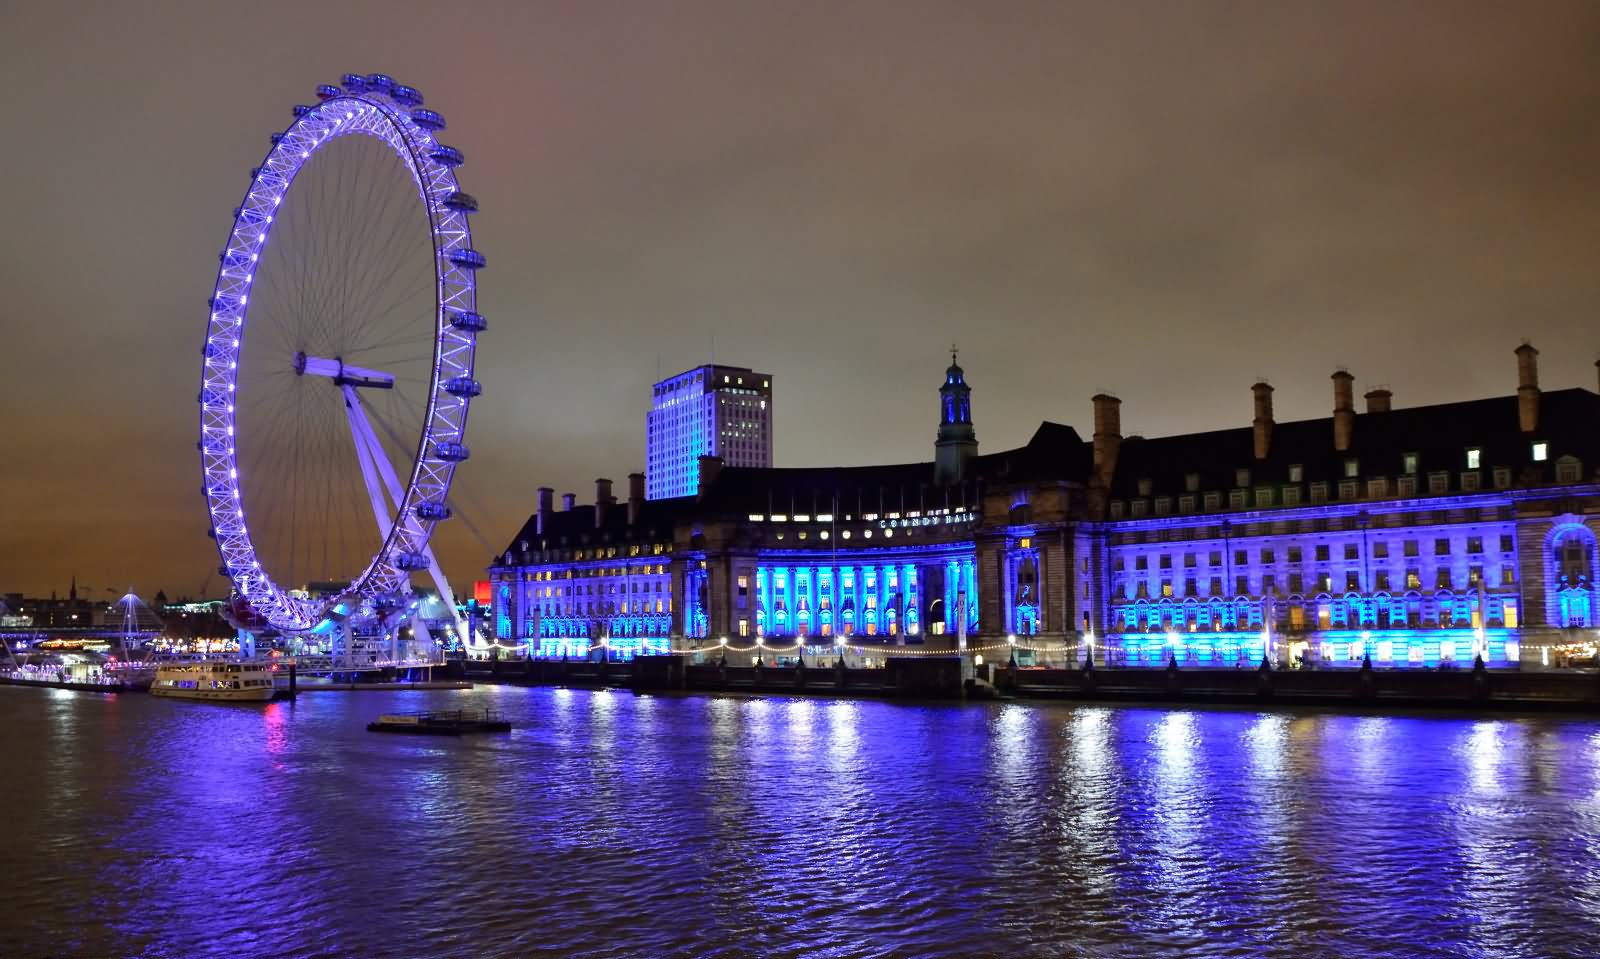 London Eye On The Bank Of River Thames Night View